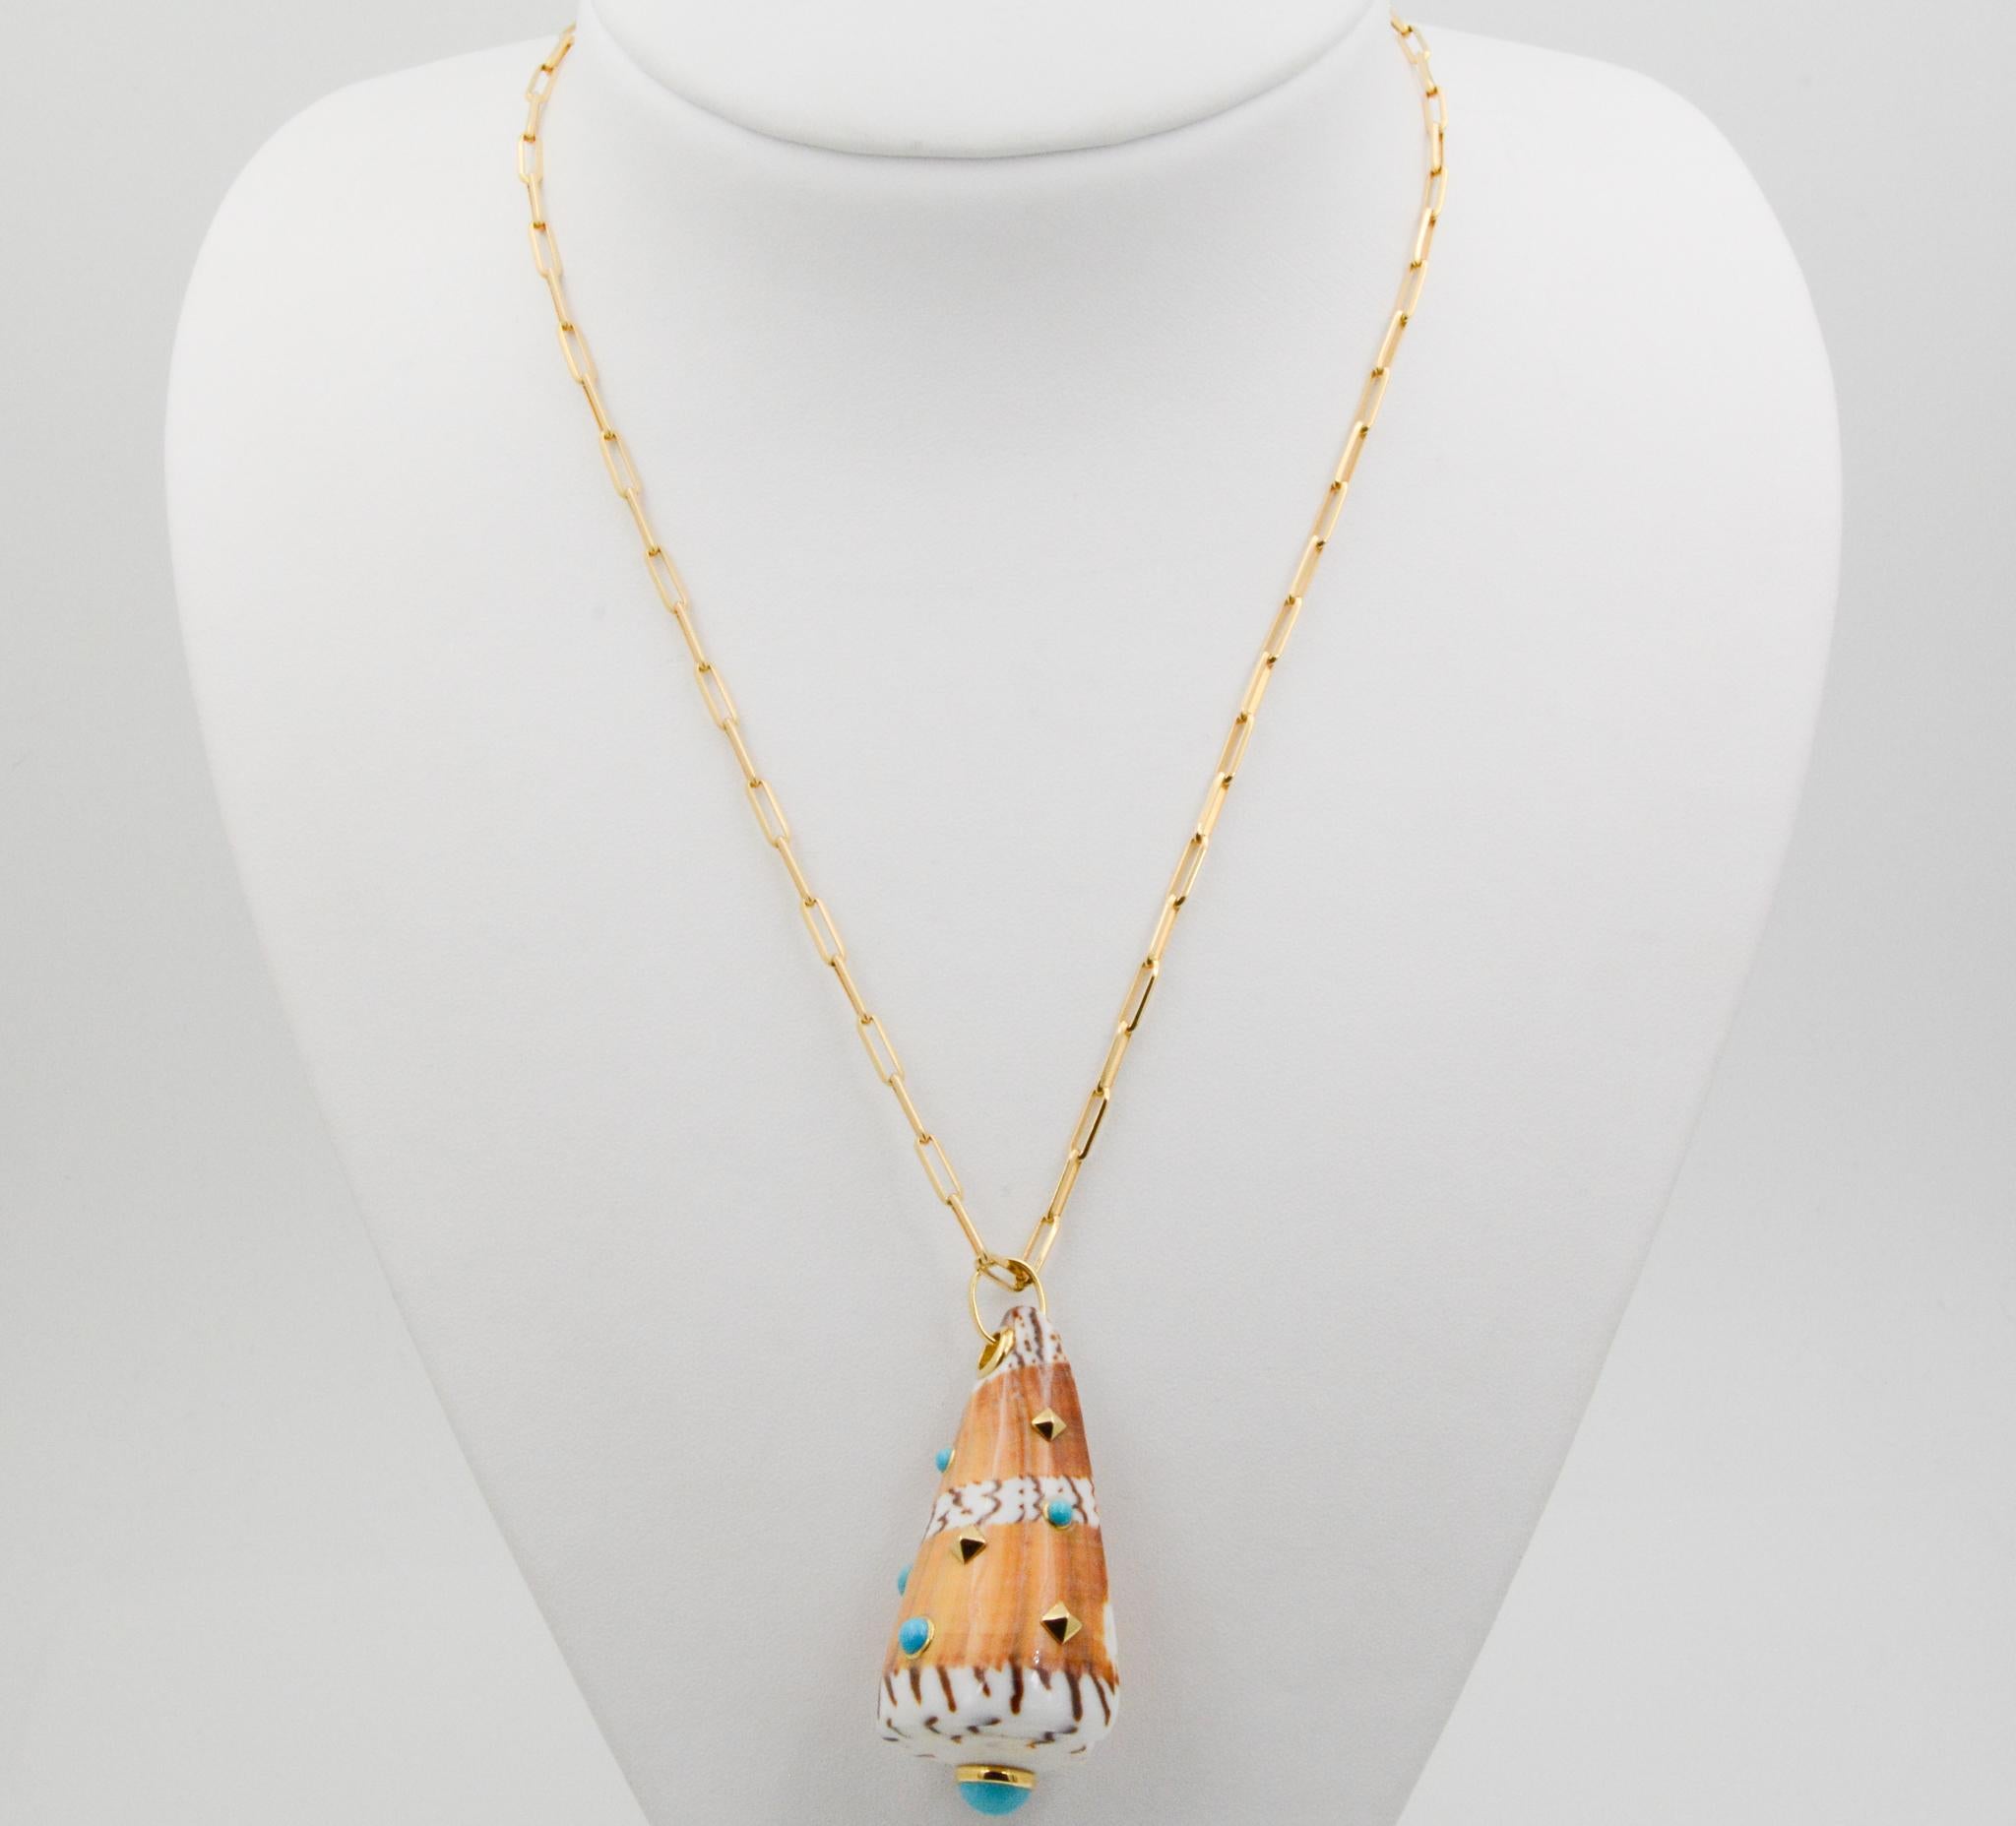 From Seaman Schepps, this General Cone Shell pendant features turquoise and 18 karat yellow gold squares with grommet and bail set in yellow gold. The pendant measures at 50x26mm. 
The pendant hangs on a 27 inch long 18 karat yellow gold paperclip